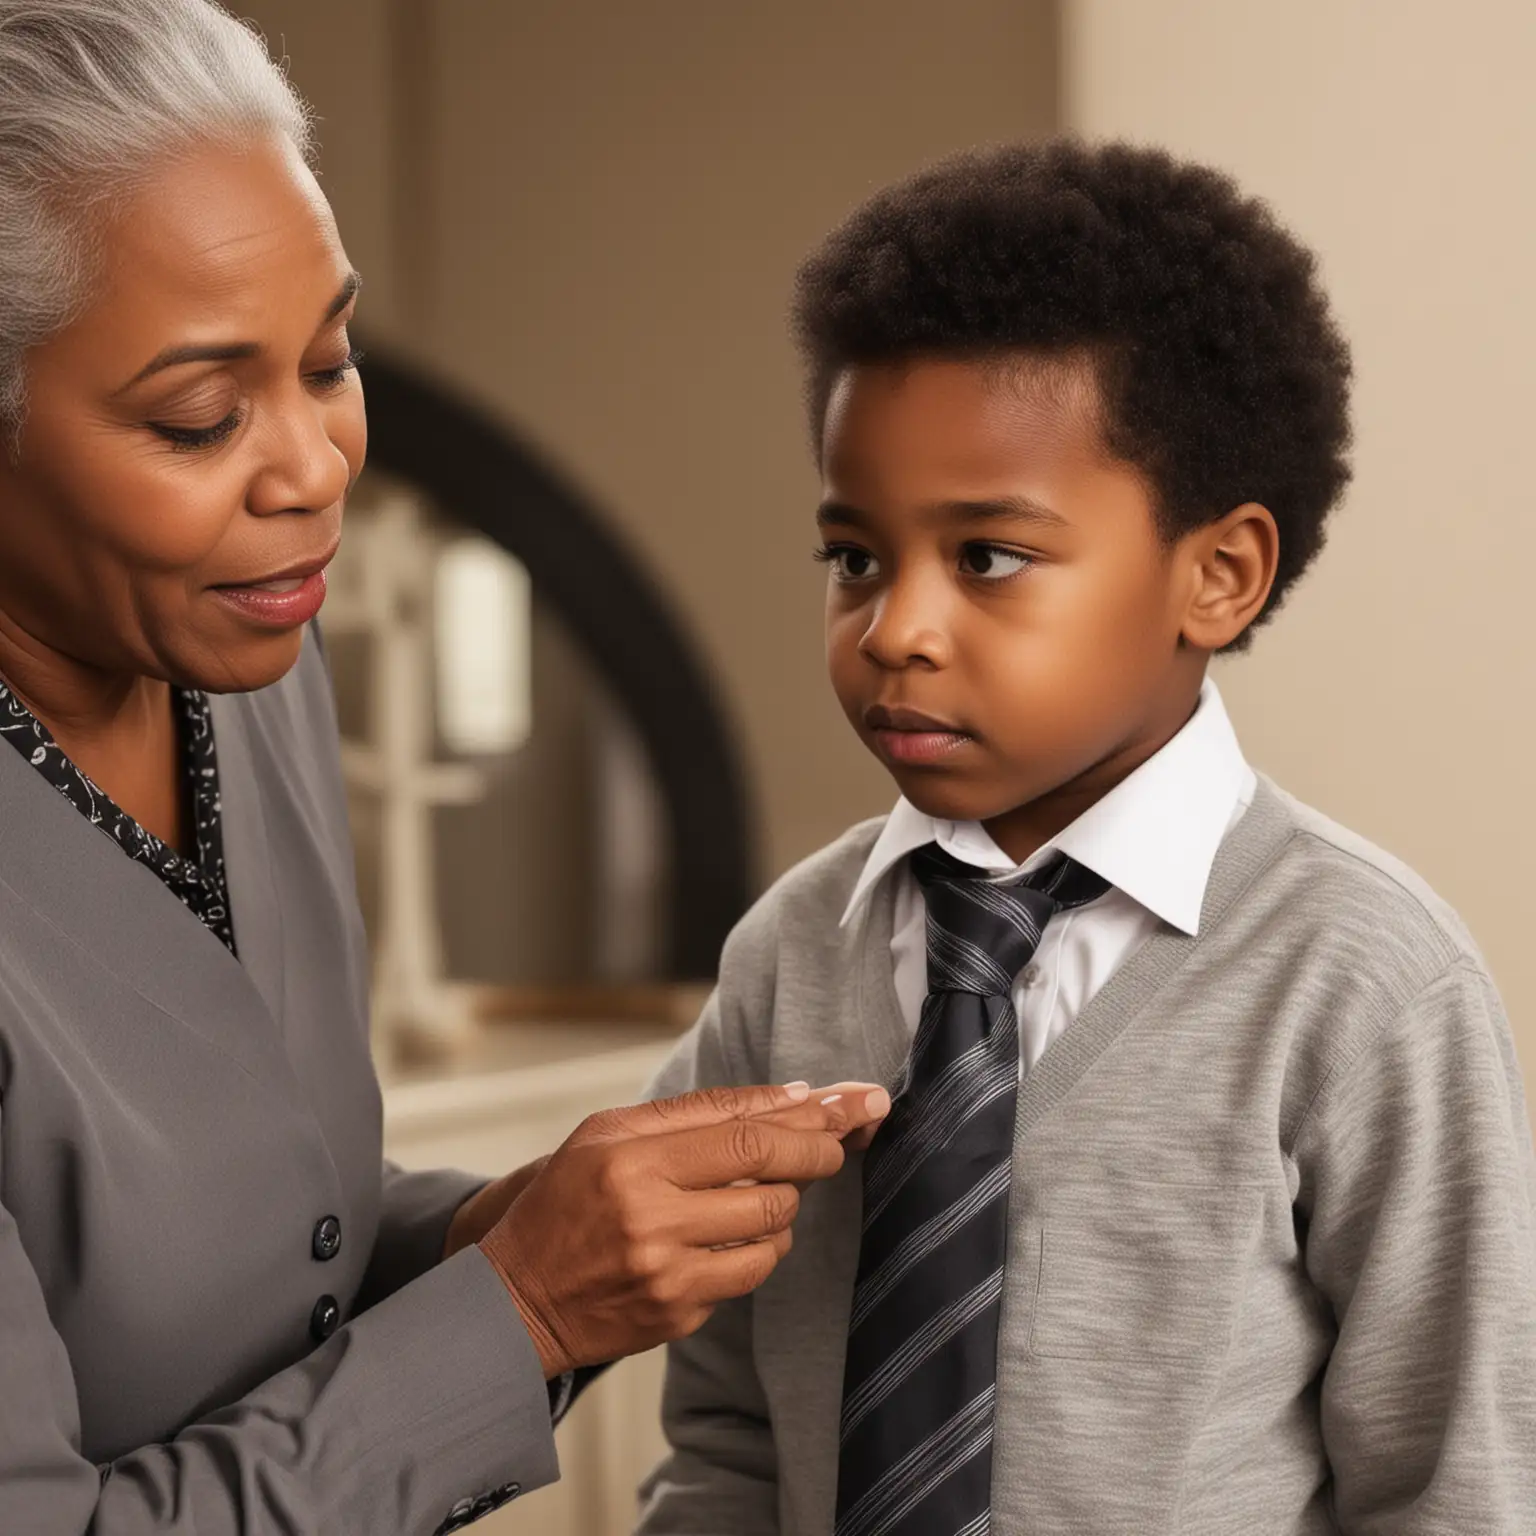 Black Grandmother Helping Young Boy with Church Tie